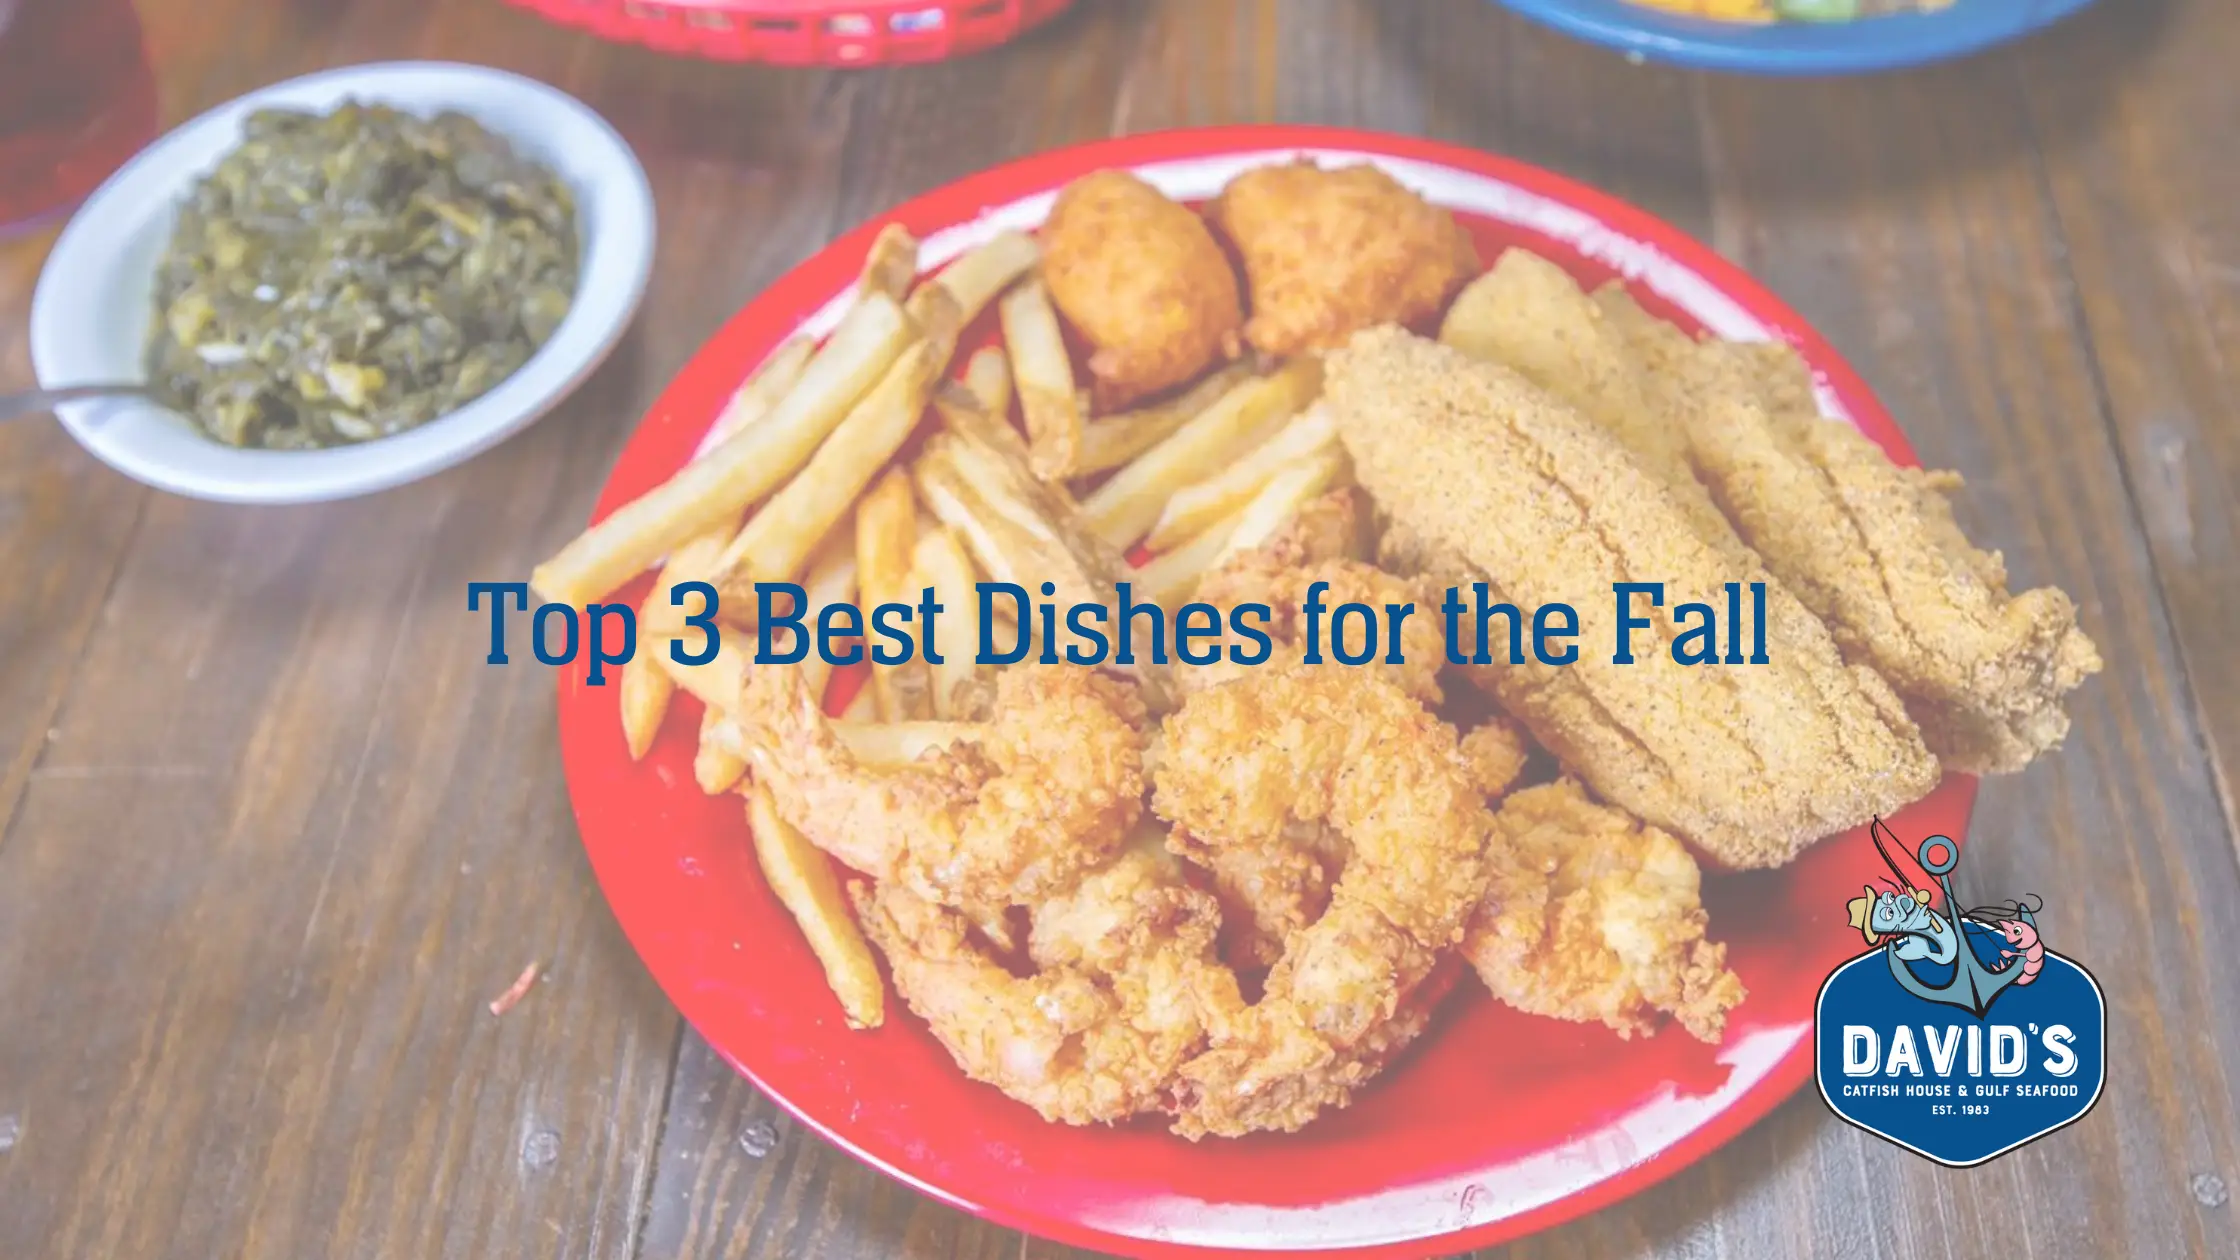 Top 3 Best Dishes for the Fall